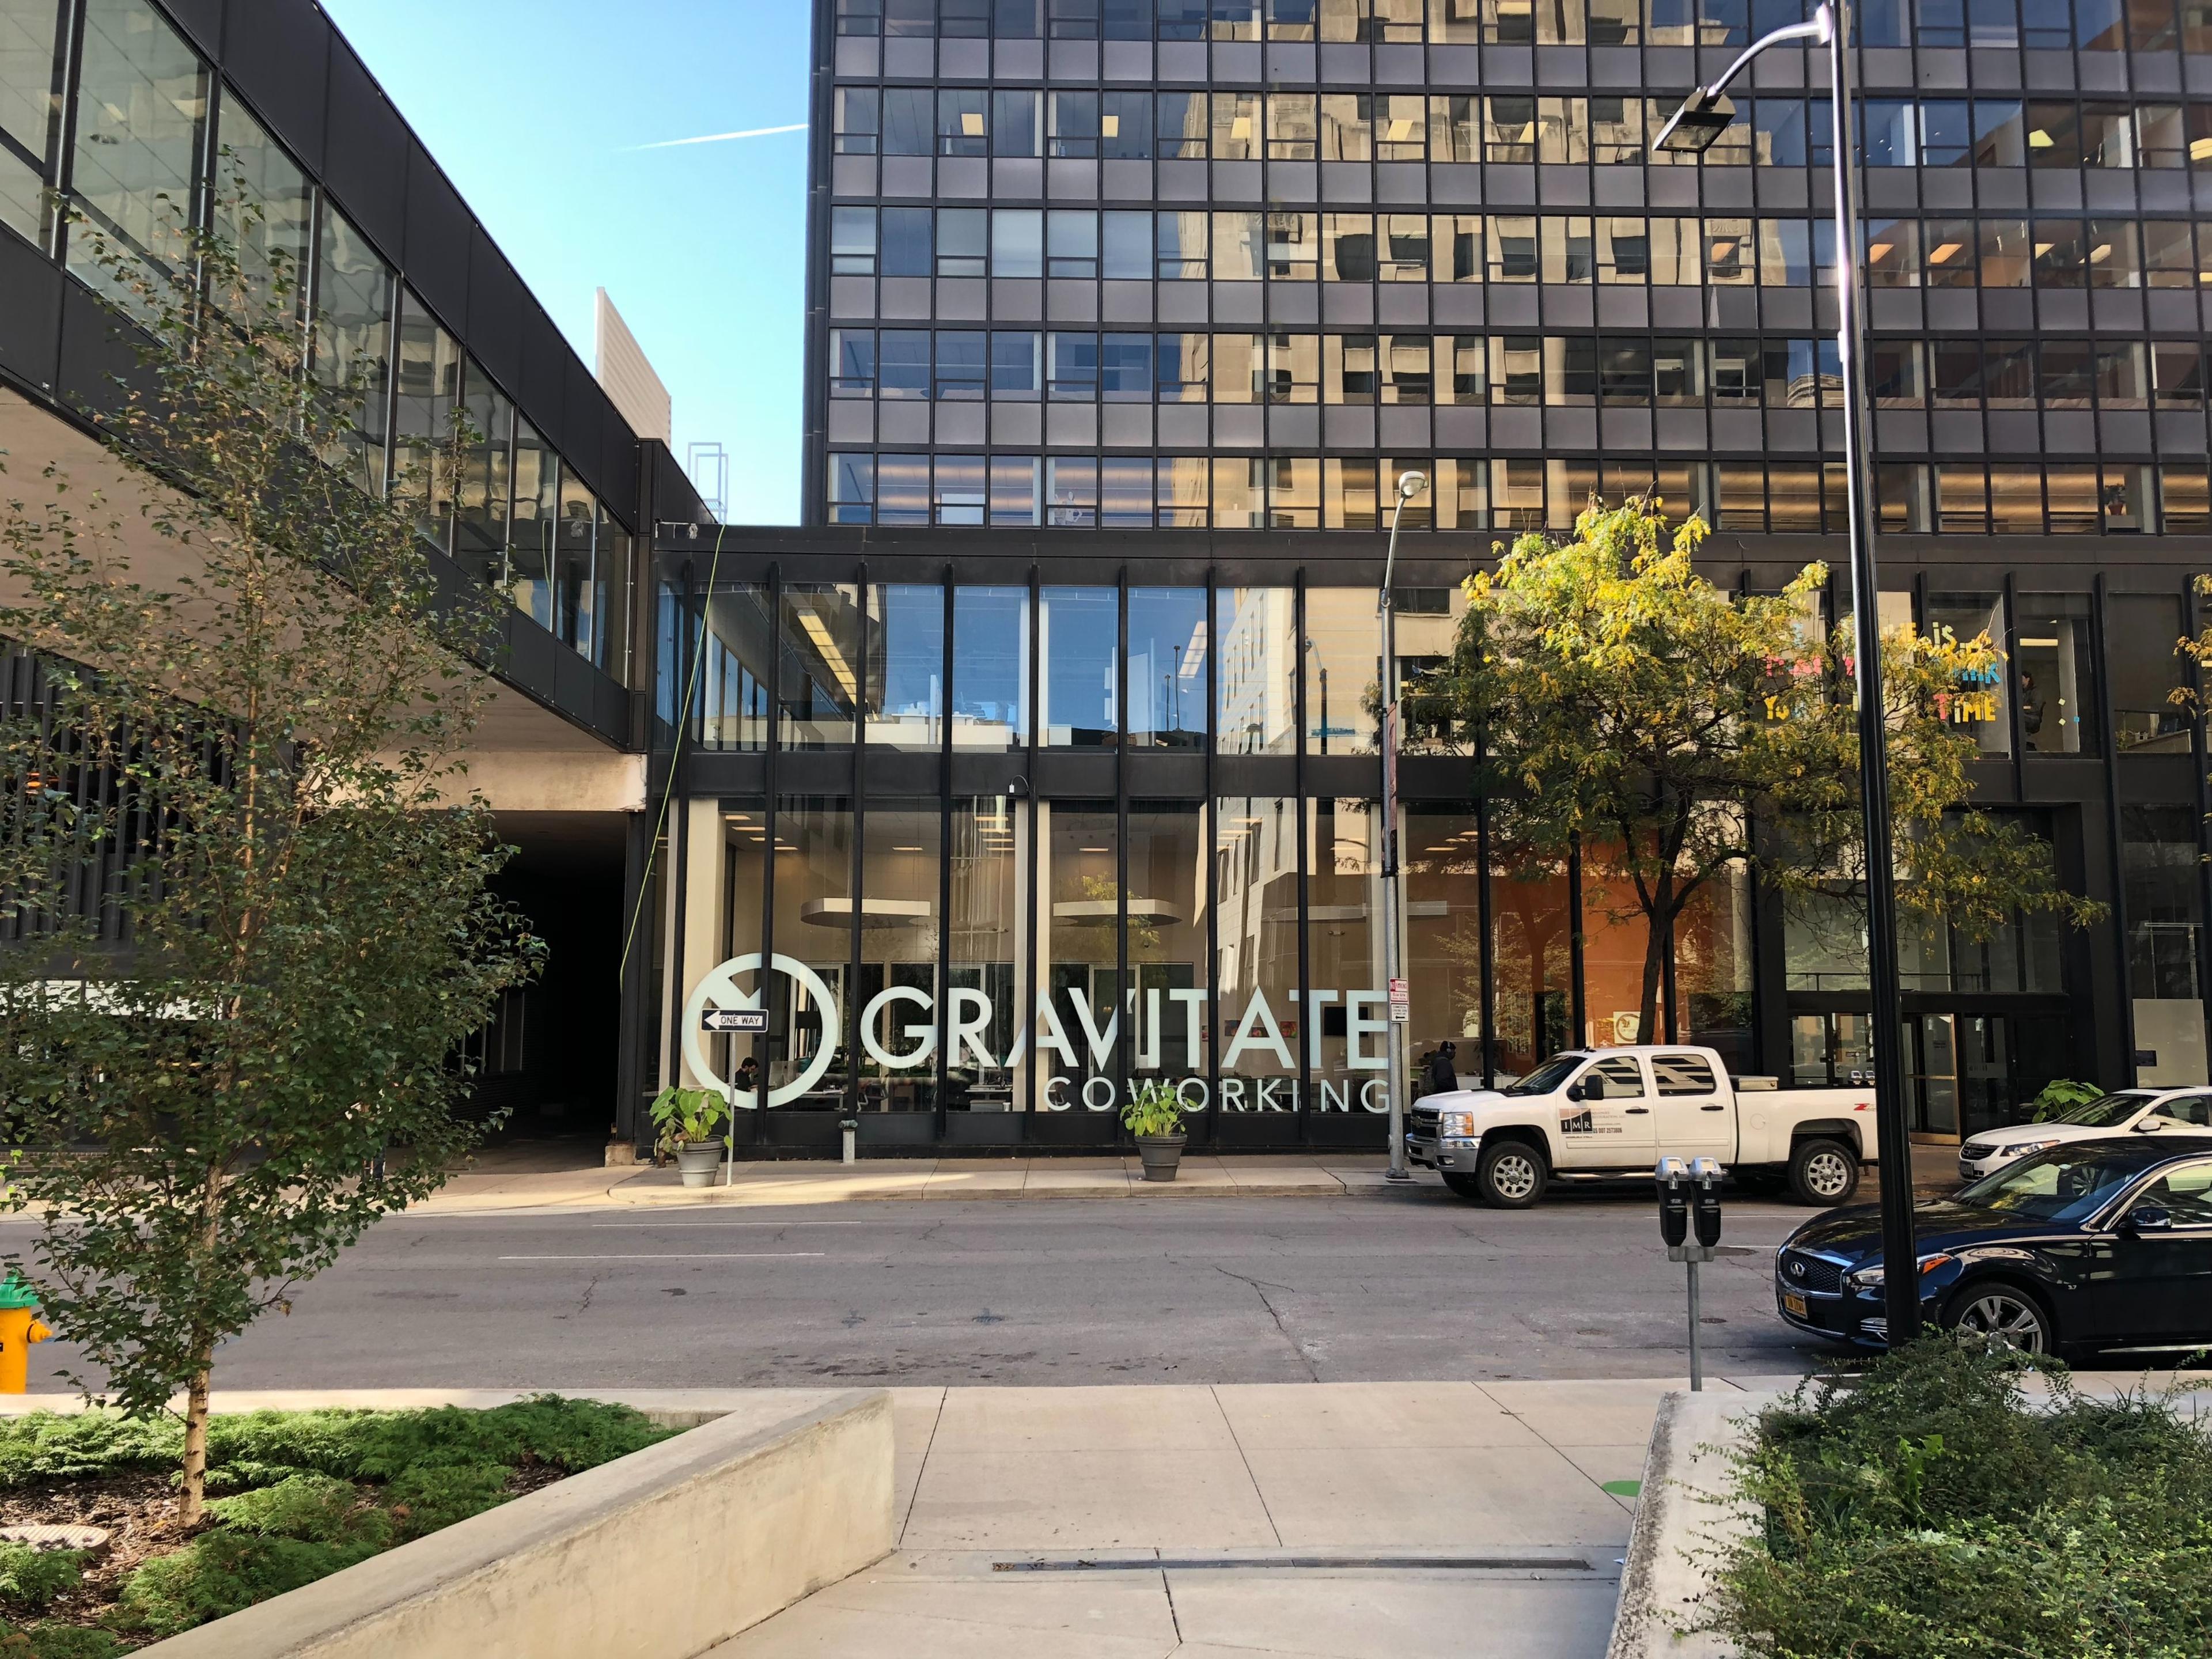 Gravitate Coworking (Downtown)